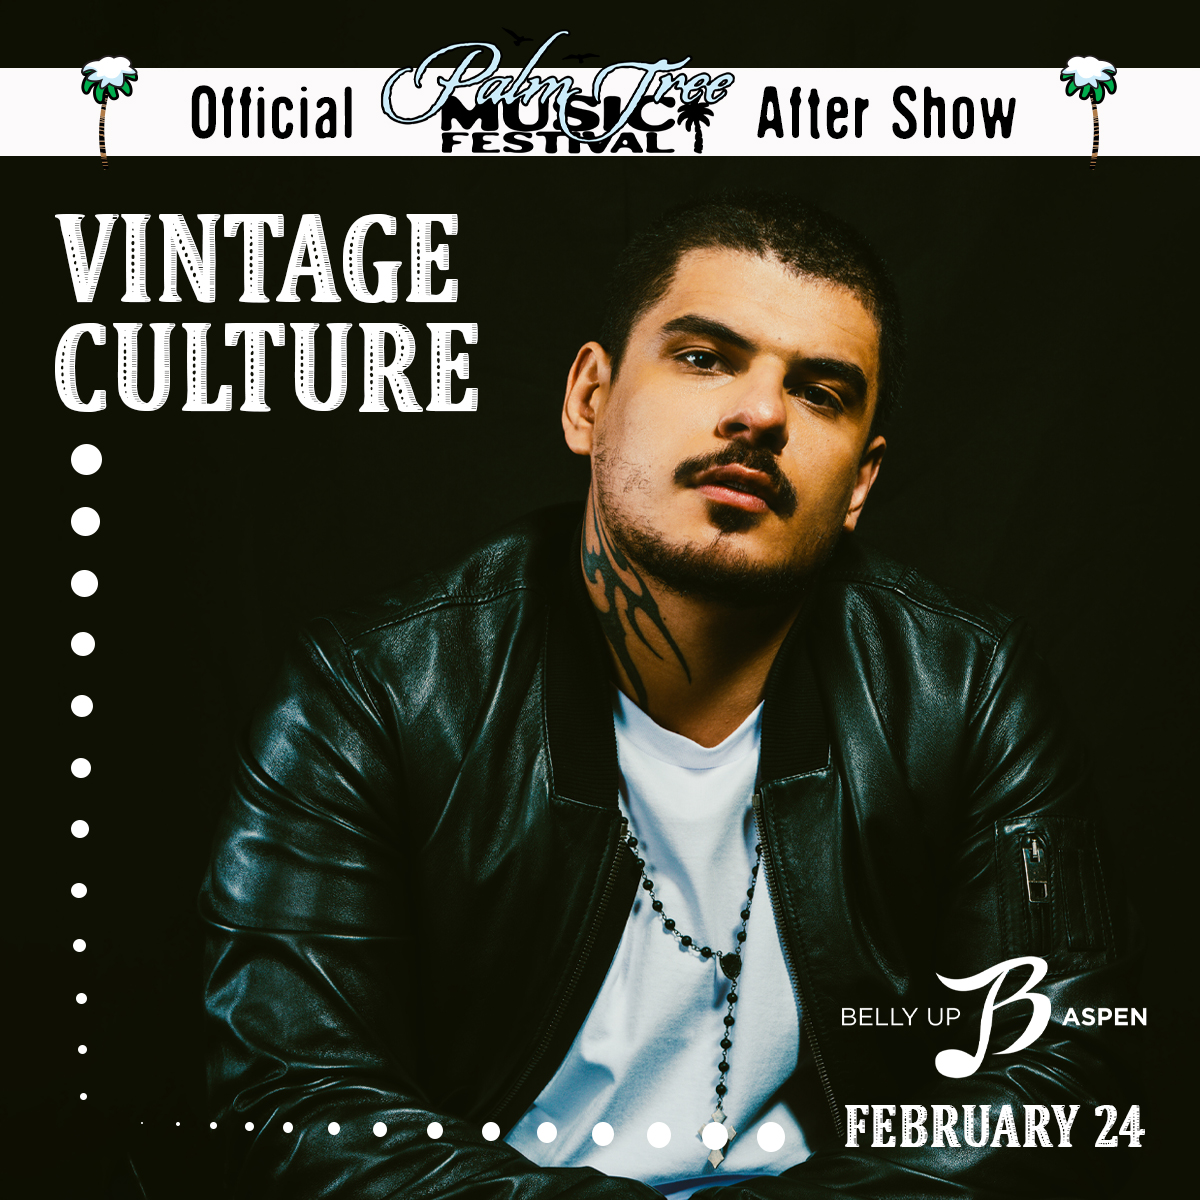 . @VintageCulture | Official Palm Tree Music Festival After Show | Saturday, 2/24 Presale starts Thu, 1/18 @ 10am MT. Sign up by 8:30am MT on 1/18 to receive the presale code: bit.ly/3MSARpt